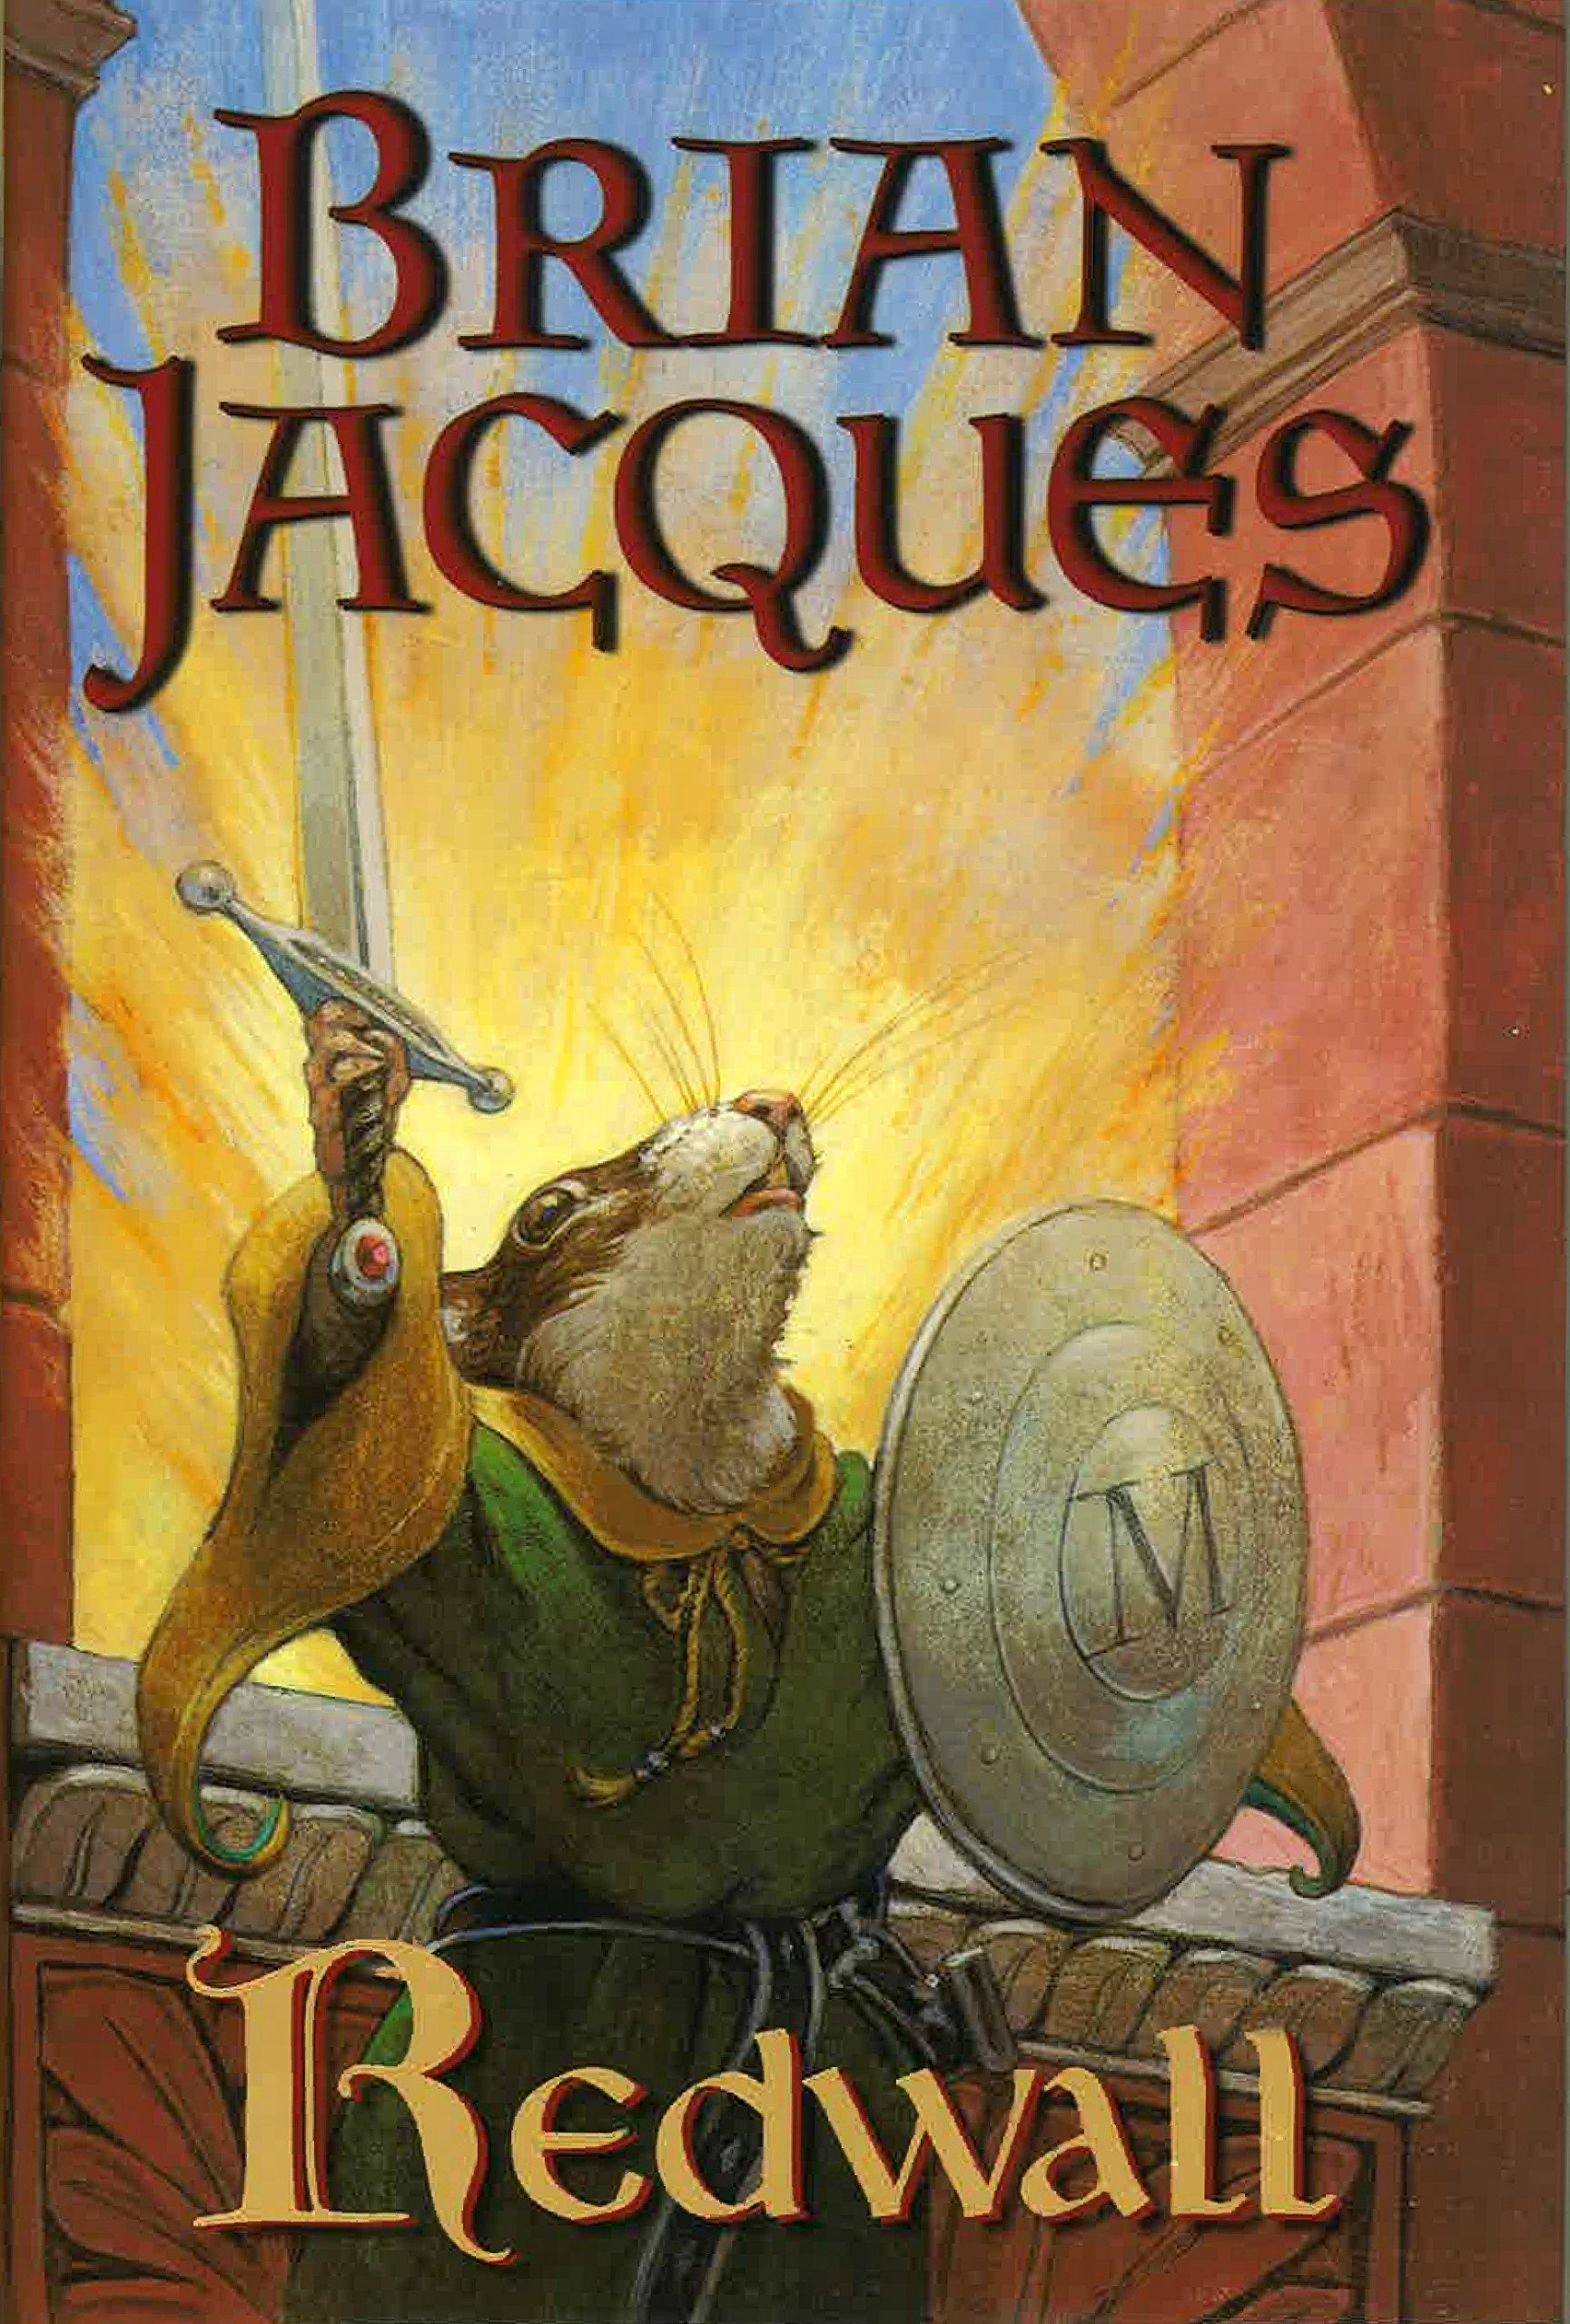 The cover of the book Redwall by Brian Jacques, featuring a mouse.